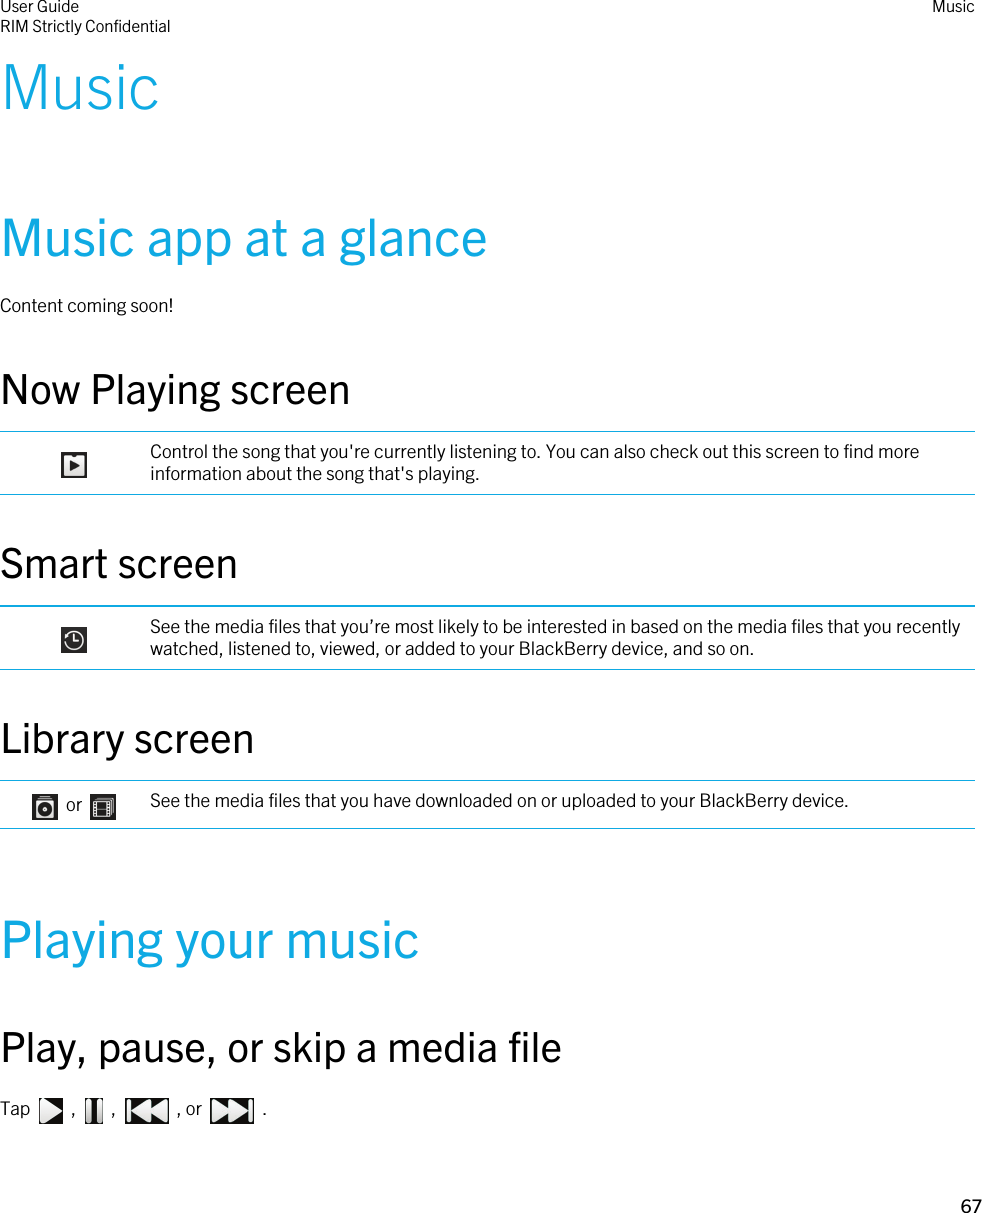 MusicMusic app at a glanceContent coming soon!Now Playing screen Control the song that you&apos;re currently listening to. You can also check out this screen to find more information about the song that&apos;s playing.Smart screen See the media files that you’re most likely to be interested in based on the media files that you recently watched, listened to, viewed, or added to your BlackBerry device, and so on.Library screen    or  See the media files that you have downloaded on or uploaded to your BlackBerry device.Playing your musicPlay, pause, or skip a media fileTap    ,    ,    , or    . User GuideRIM Strictly ConfidentialMusic67 